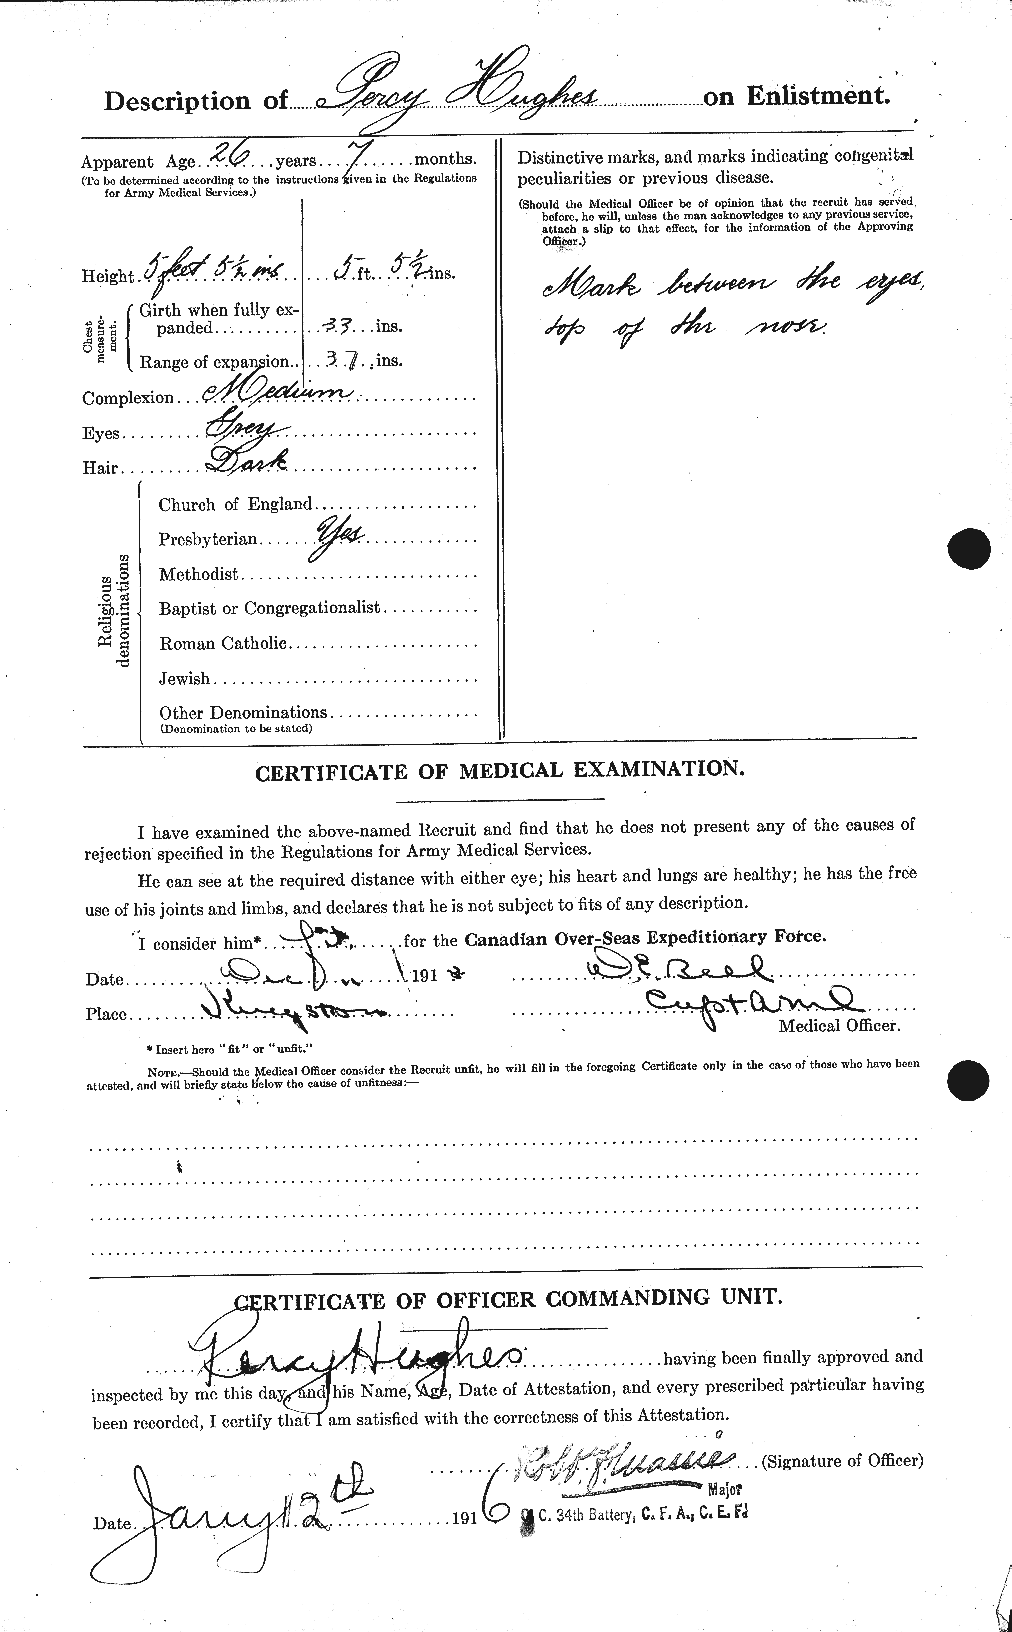 Personnel Records of the First World War - CEF 404153b